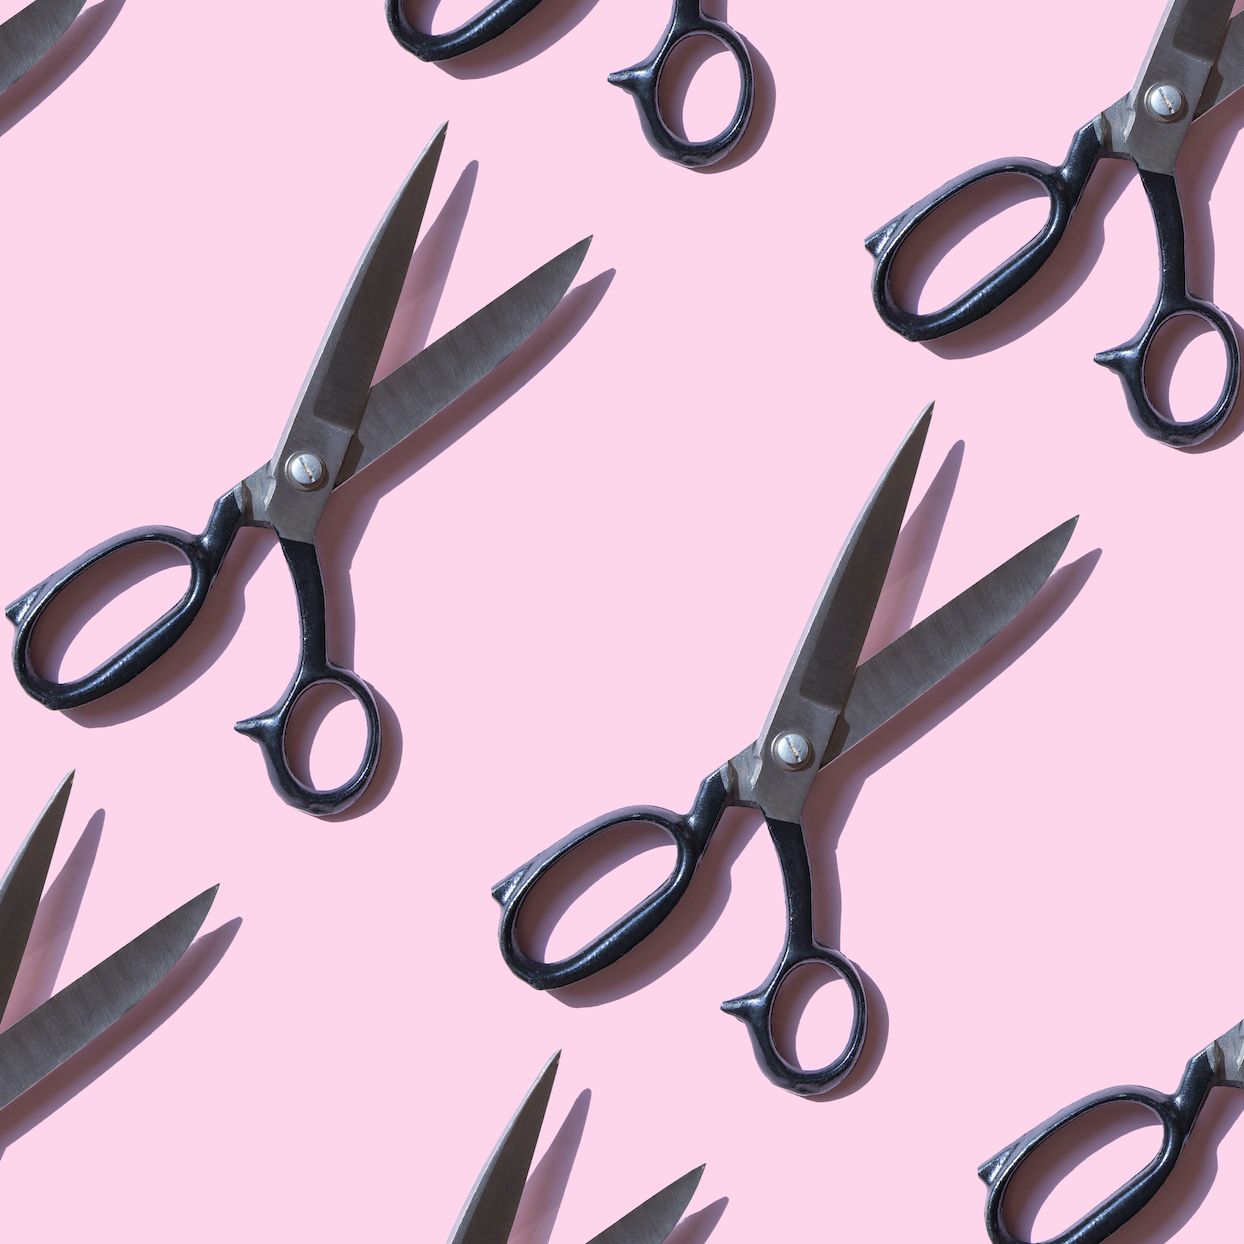 Repeated vintage scissors on pink background